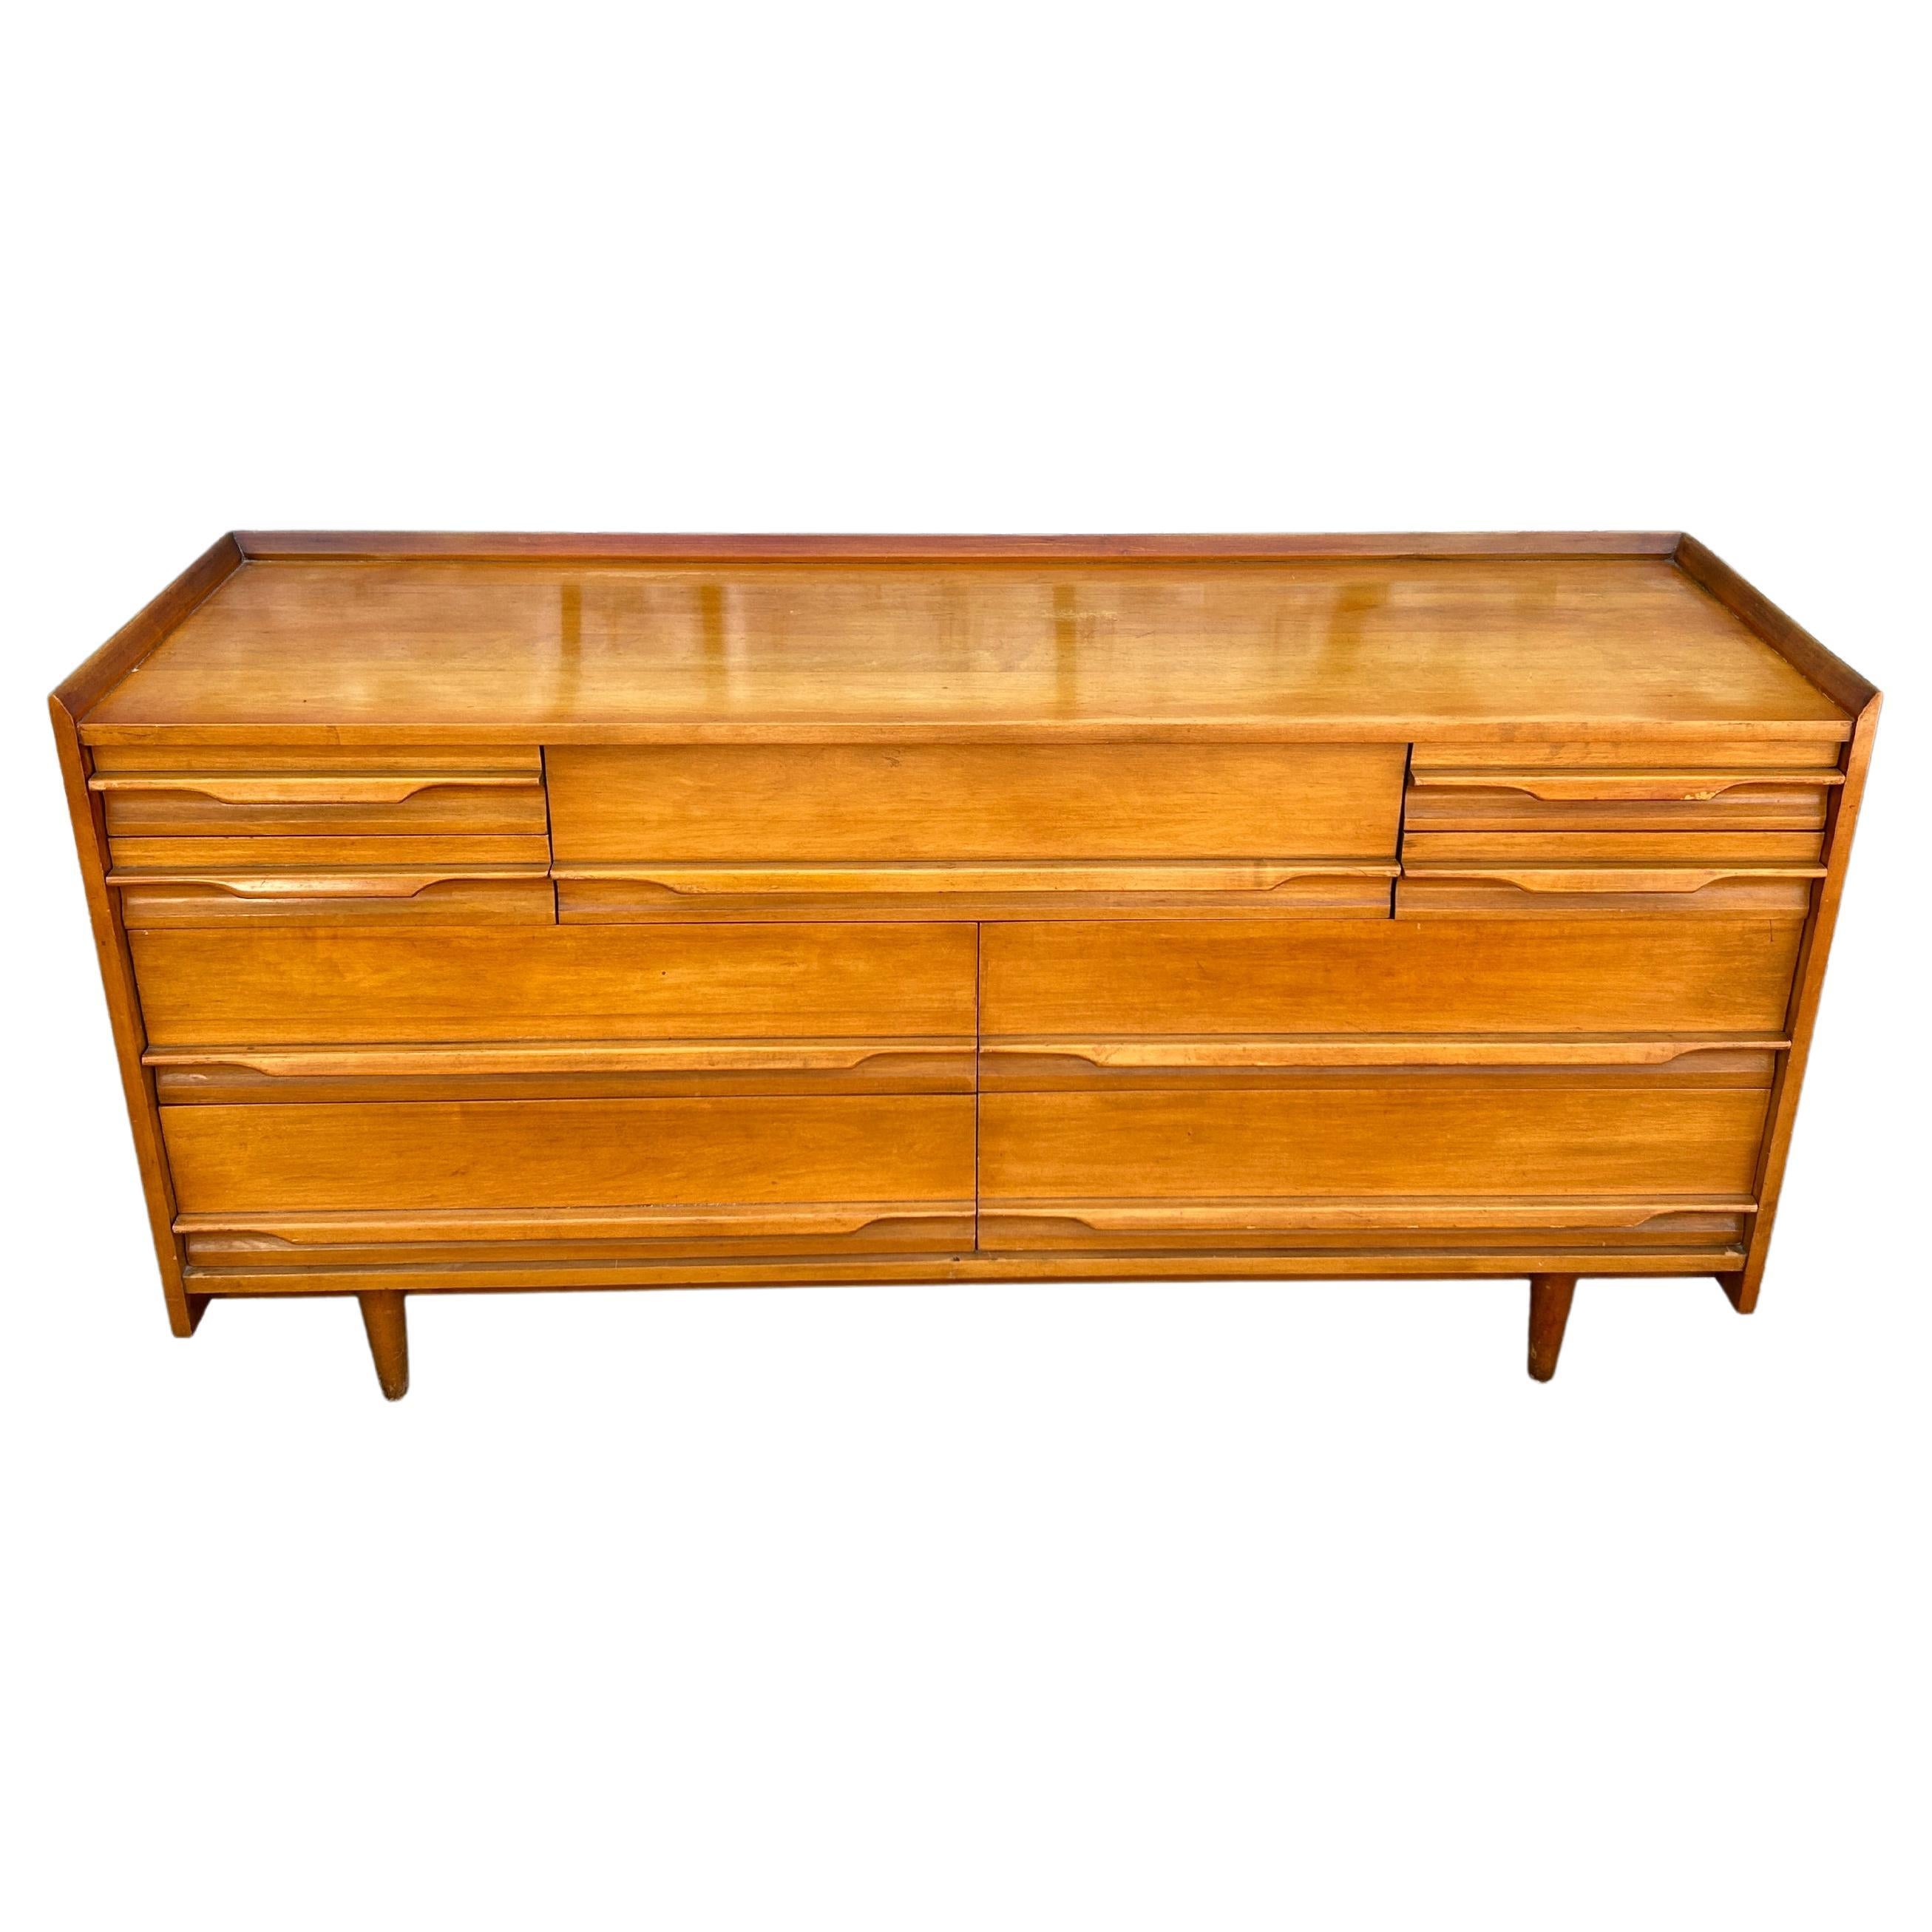 Unique Mid-Century Modern American solid maple tall 9 drawer low long dresser by Crawford. All solid maple construction with carved handles and sits on 4 tapered legs. Vintage original condition. Shows little wear on top surface drawers clean